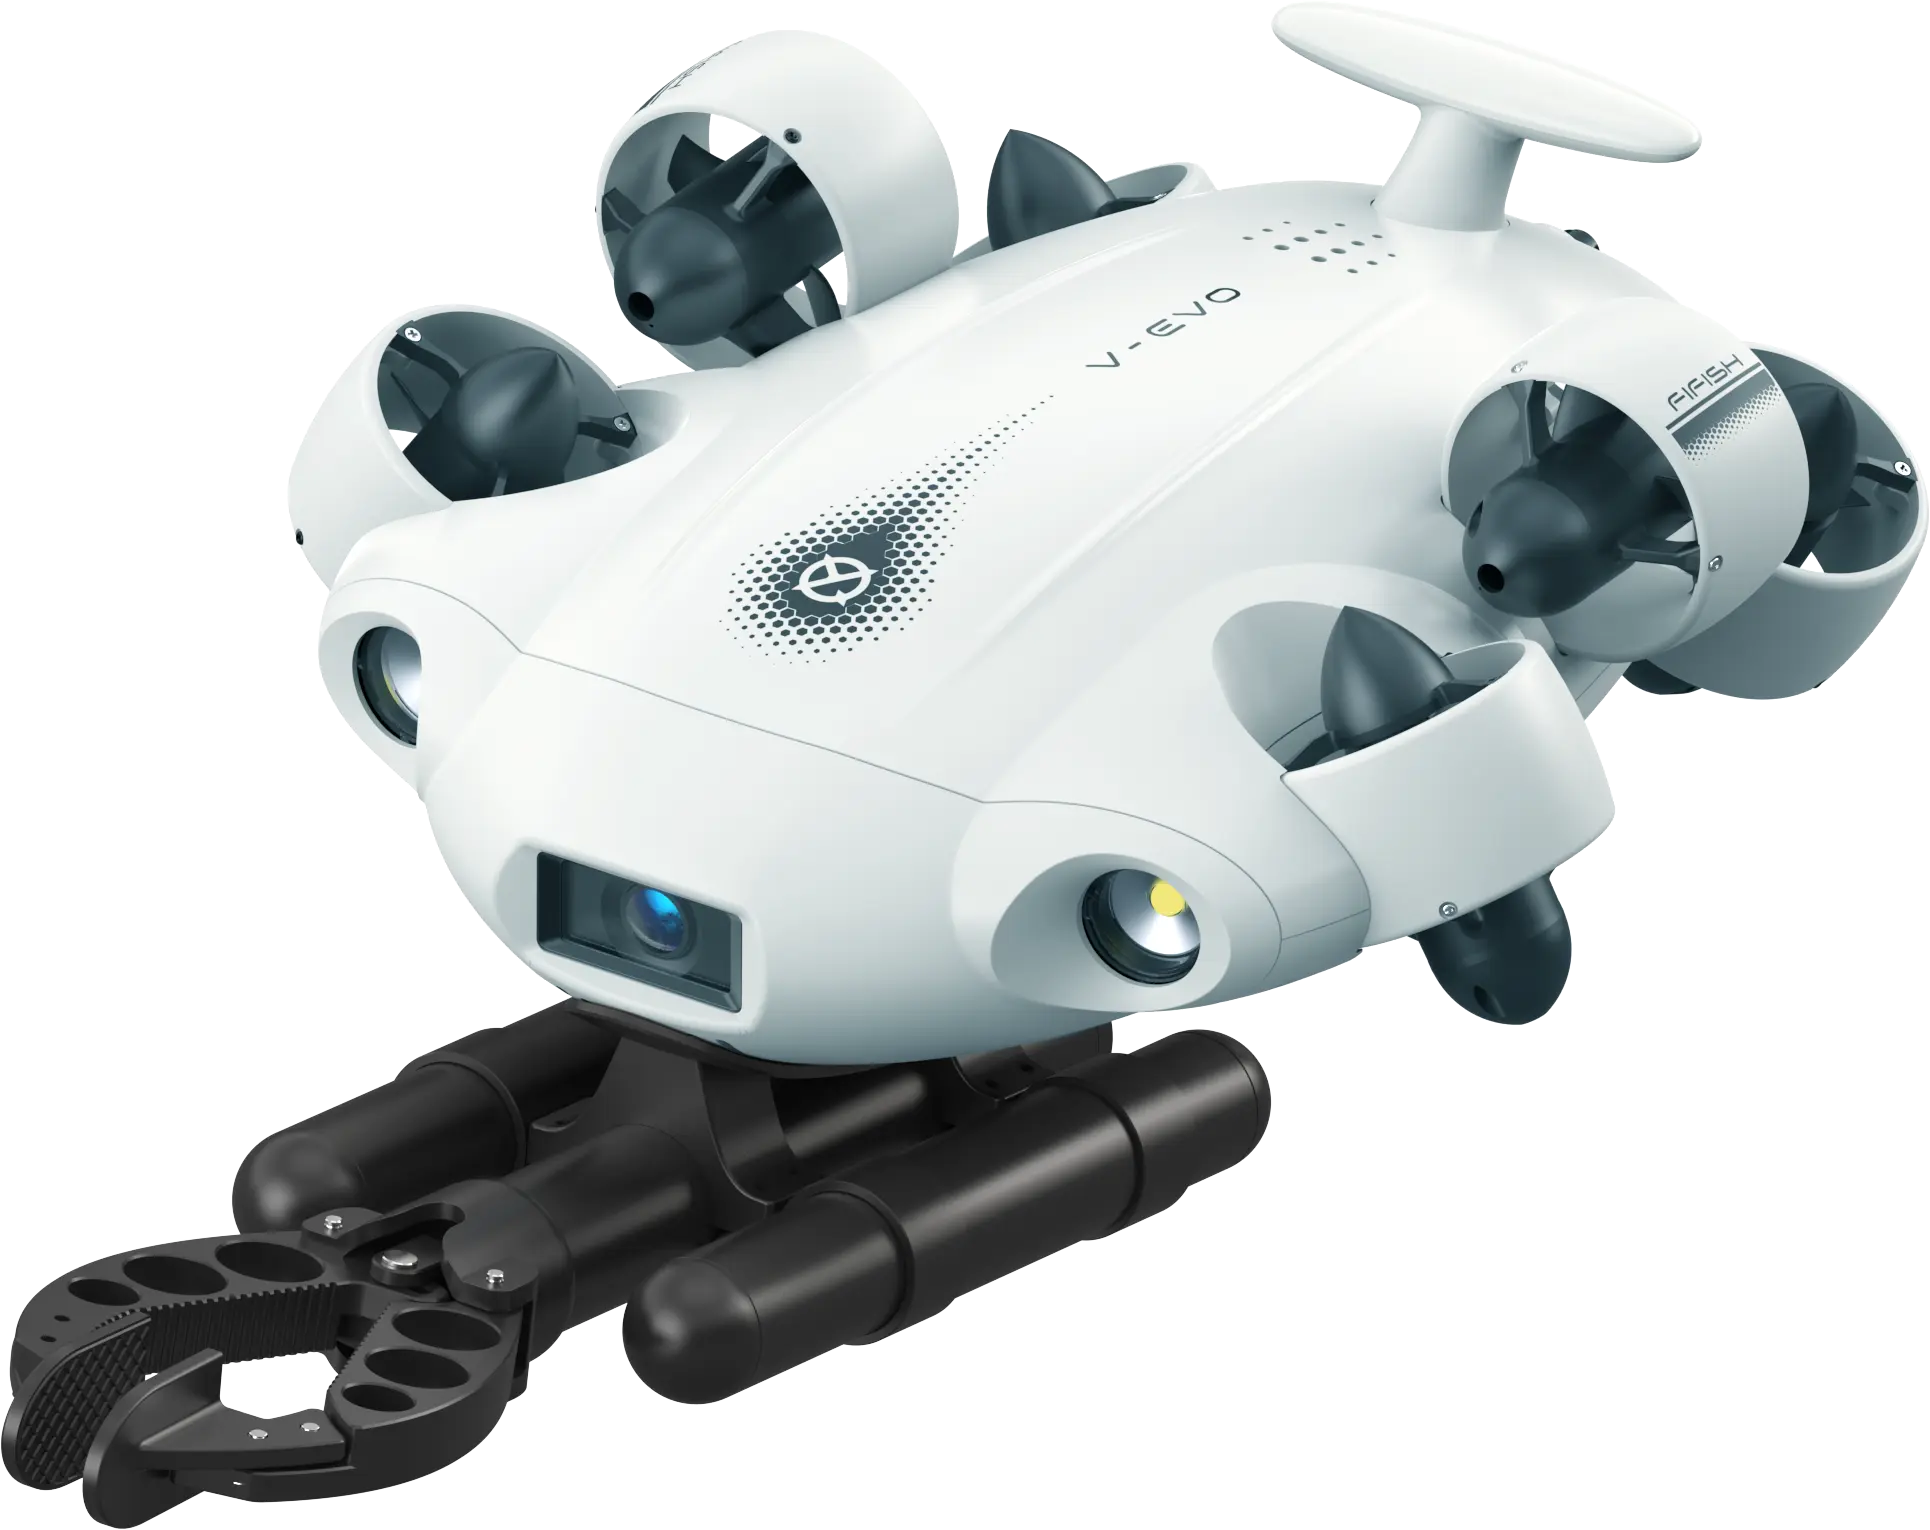 QYSEA FIFISH V-EVO, an underwater ROV delivers 4K UHD video shooting at 60 frames per second, along with an ultra-wide 166-degree field of view, can move & film with absolute freedom underwater